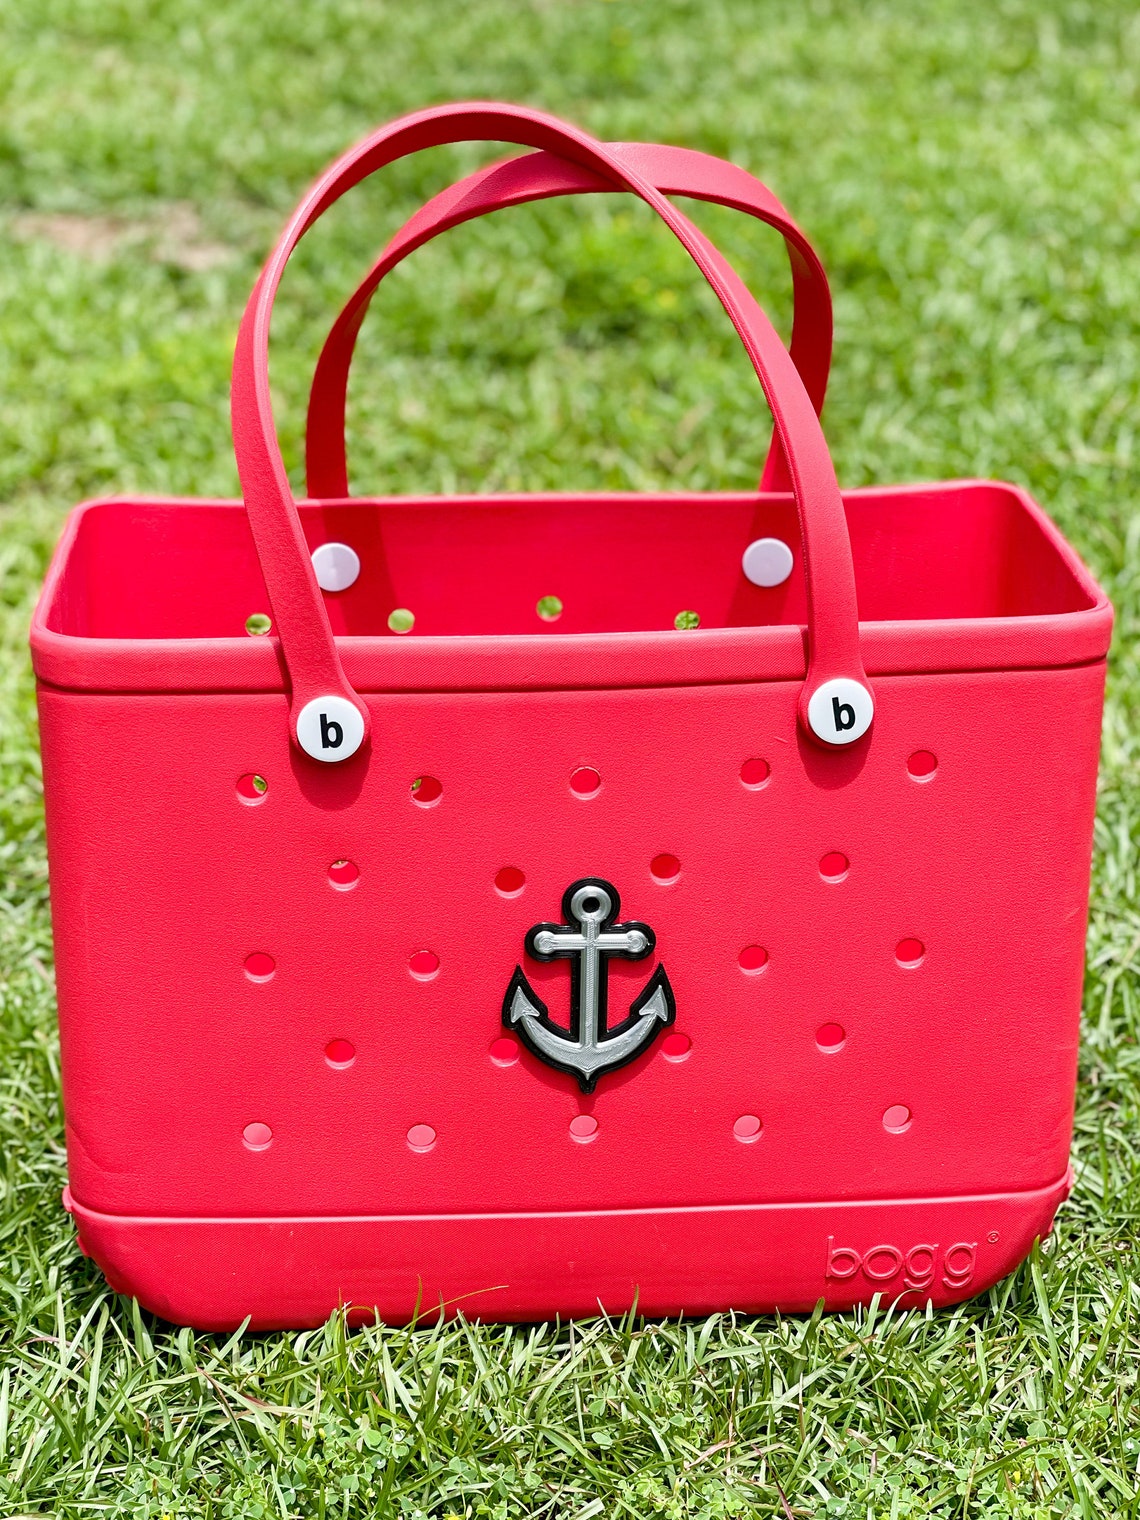 Anchor Bag Charm Water Resistant Bogg Bag Accessories Pool - Etsy